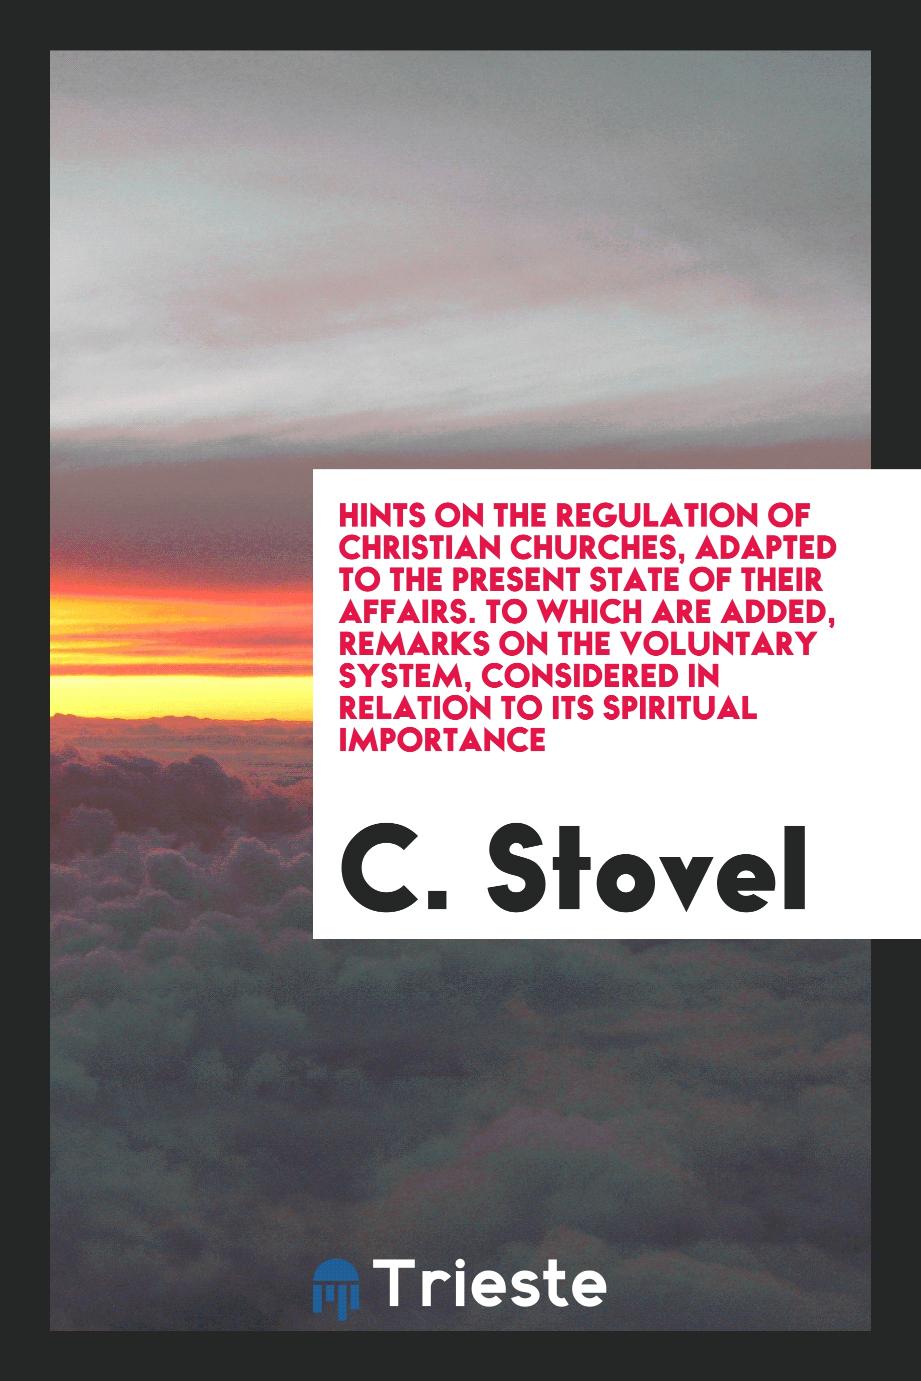 Hints on the regulation of Christian churches, adapted to the present state of their affairs. To which are added, remarks on the voluntary system, considered in relation to its spiritual importance